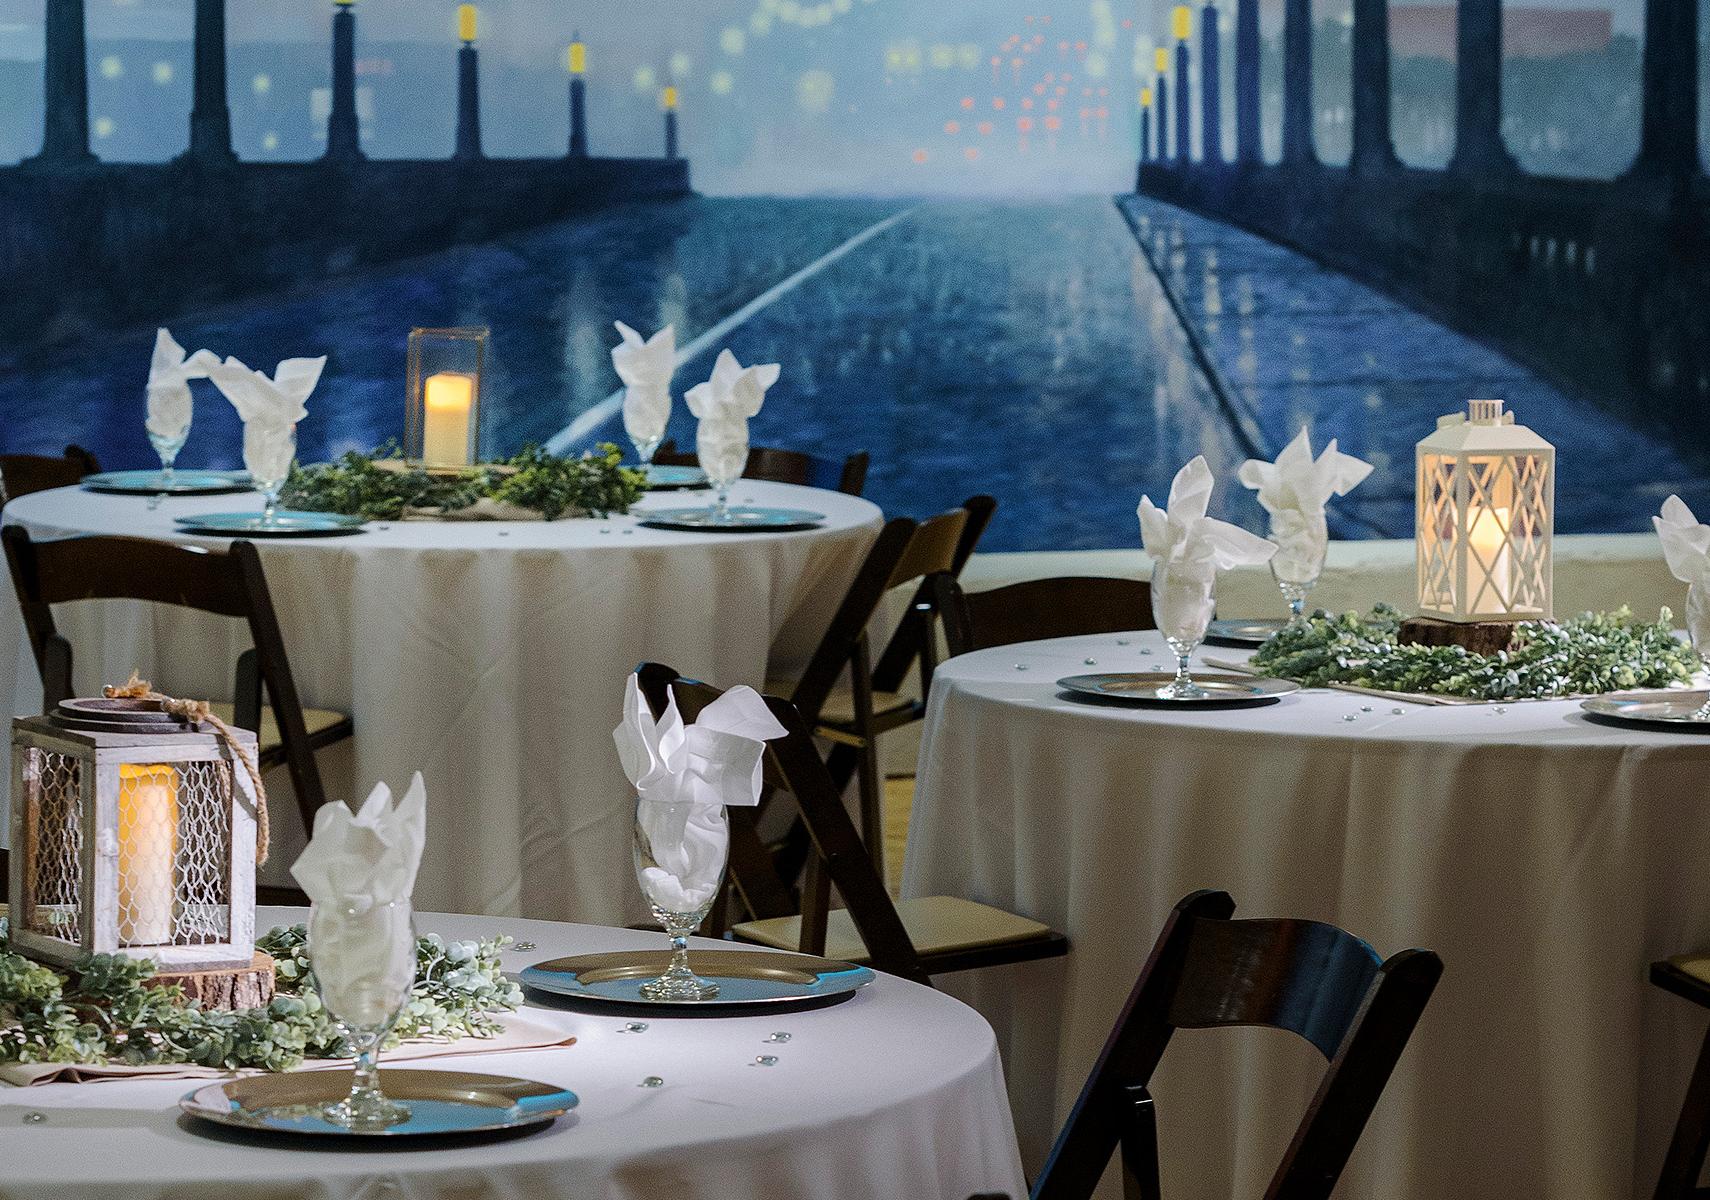 Three formally set table with the white table cloths and napkins with painted mural of bridge in the background